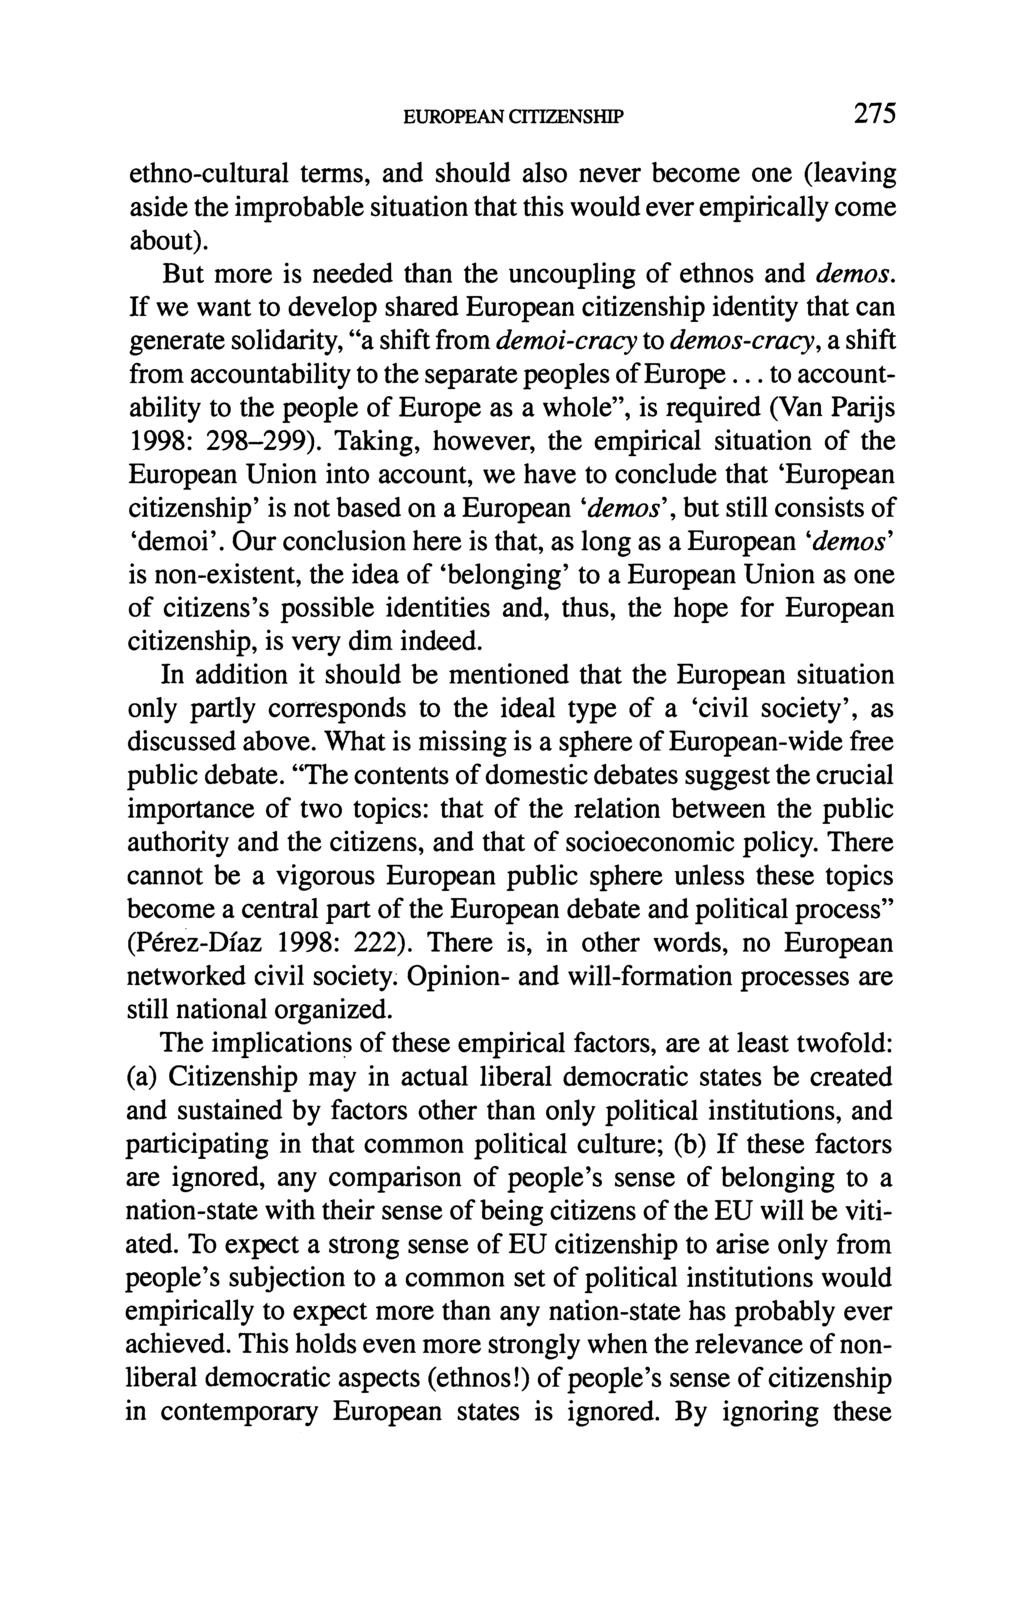 EUROPEAN CITIZENSHIP 275 ethno-cultural terms, and should also never become one (leaving aside the improbable situation that this would ever empirically come about).